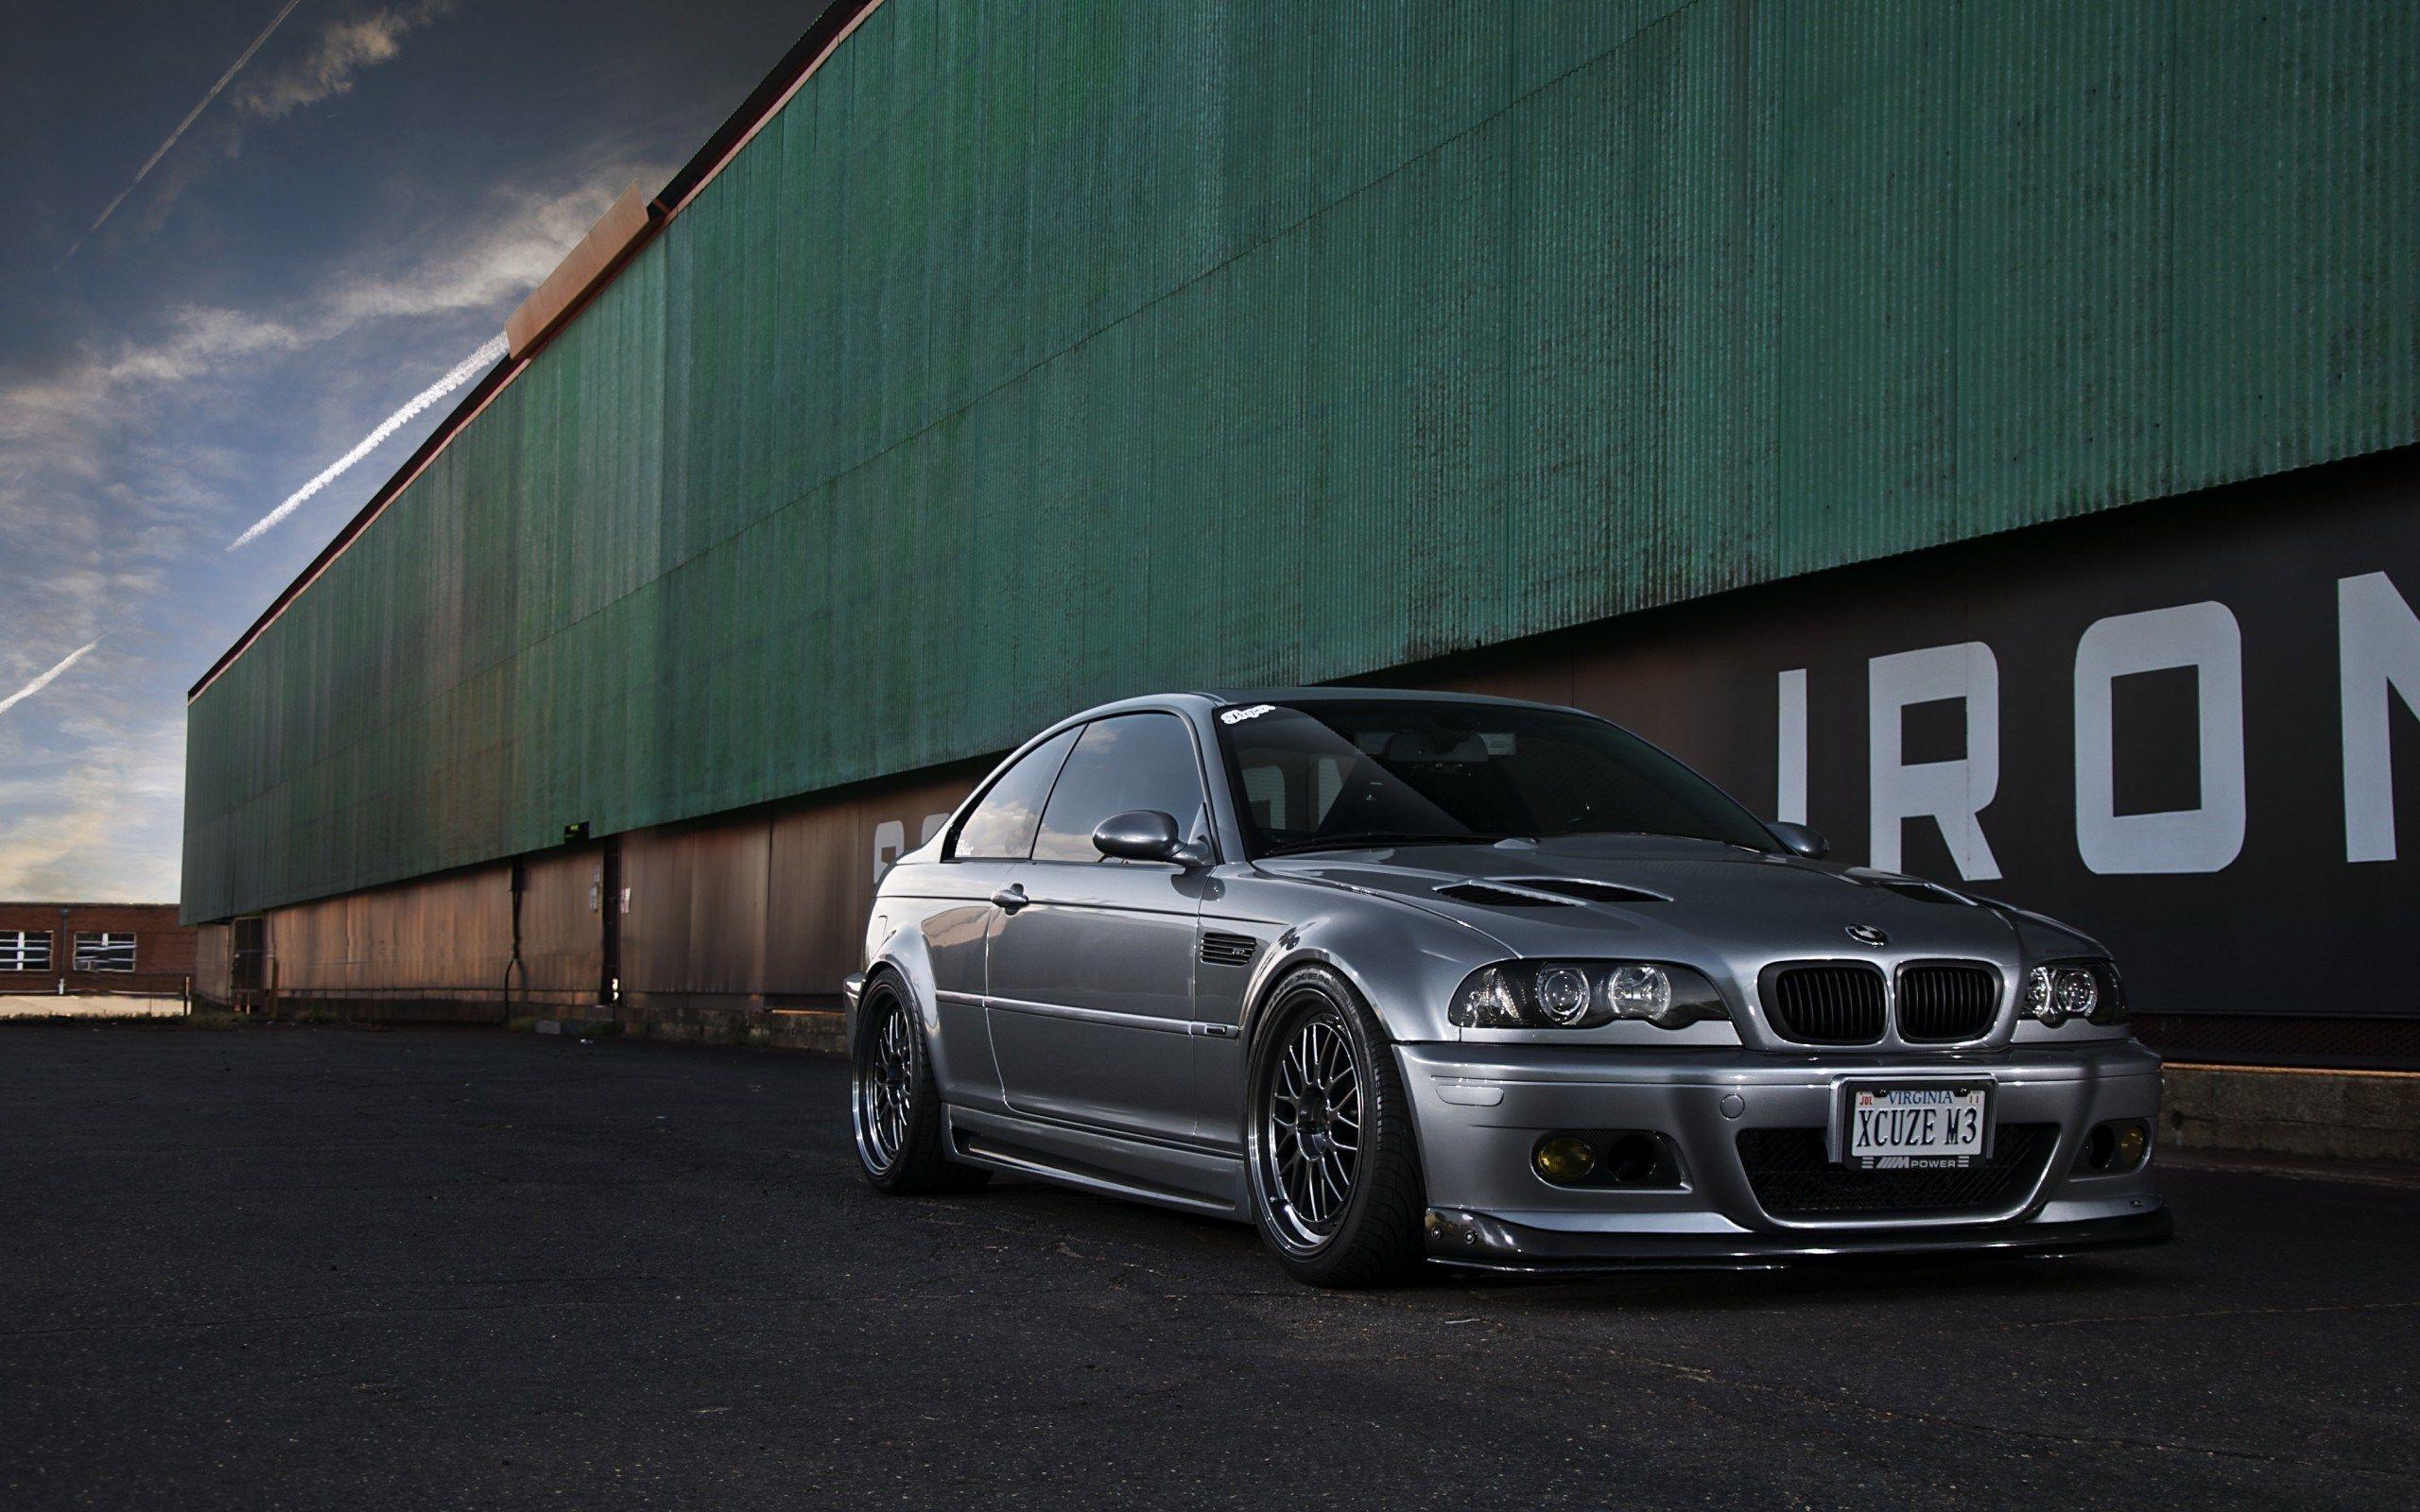 Free Download Bmw E46 M3 Wallpapers [2560X1600] For Your Desktop, Mobile &  Tablet | Explore 98+ Bmw E46 M3 Gtr Wallpapers | Bmw E36 M3 Wallpaper, Bmw  E46 Wallpaper, Bmw E46 M3 Wallpaper